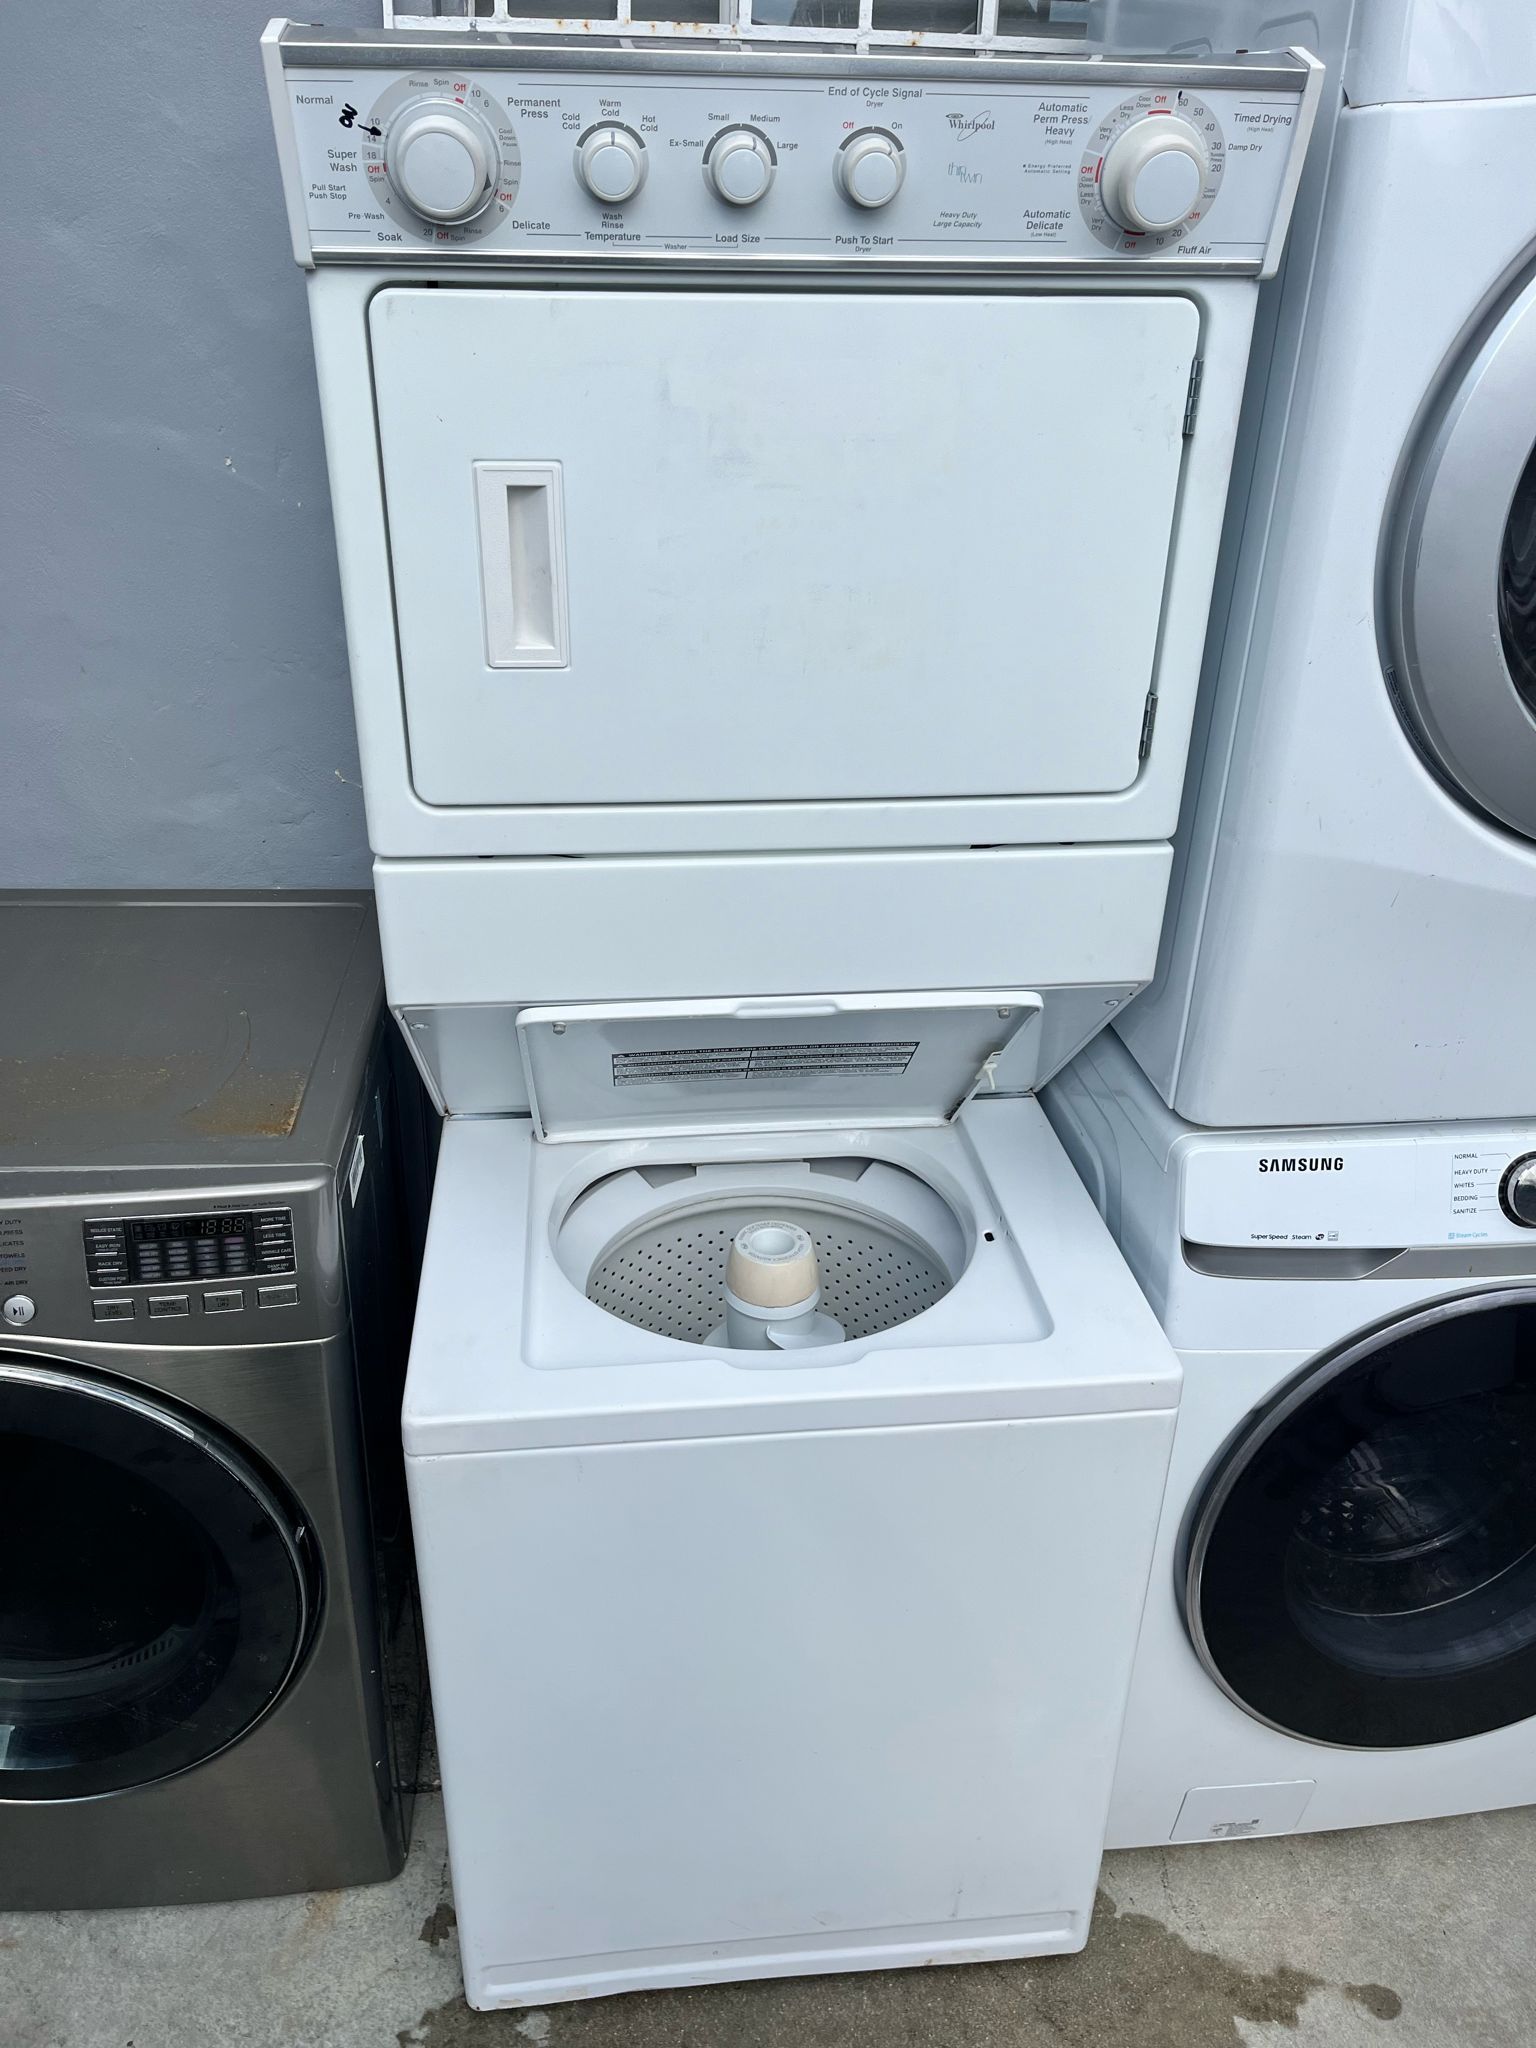 Whirlpool Laundry Washer And Dryer 27”W